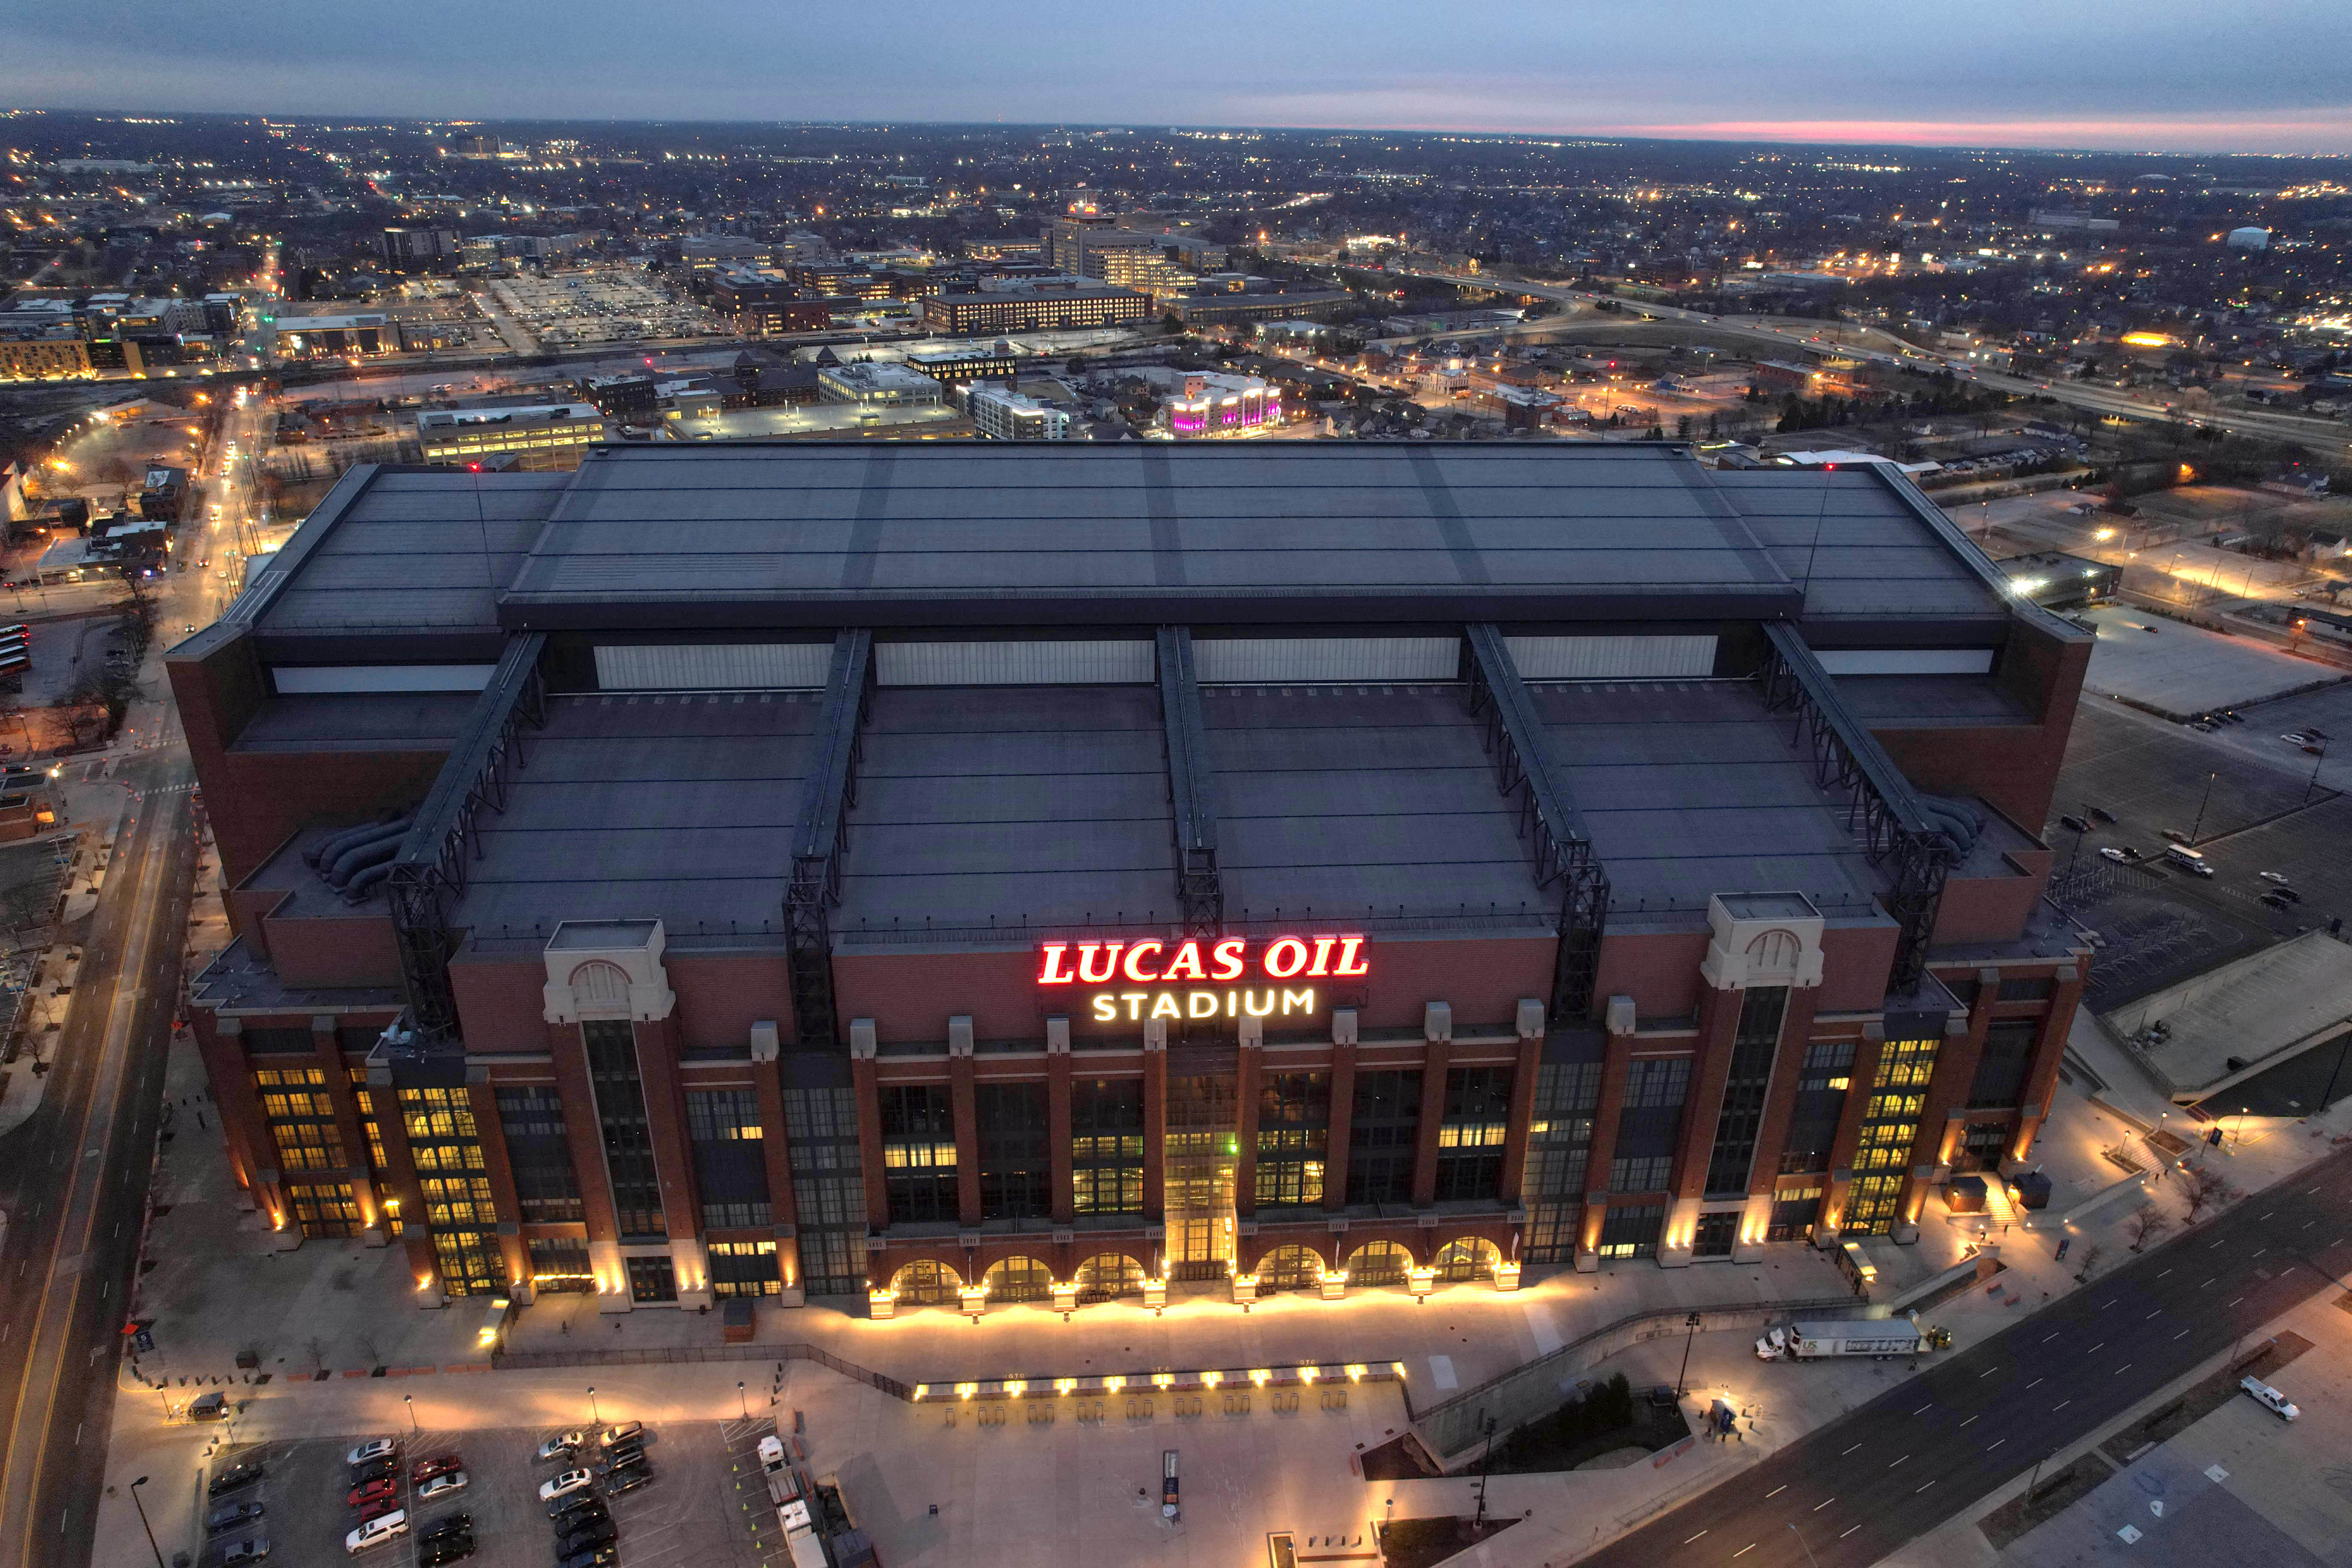 Mar 2, 2022; Indianapolis, IN, USA; A general overall aerial view of Lucas Oil Stadium, the home of the Indianapolis Colts and the site of the 2022 NFL Scouring Combine. Mandatory Credit: Kirby Lee-USA TODAY Sports